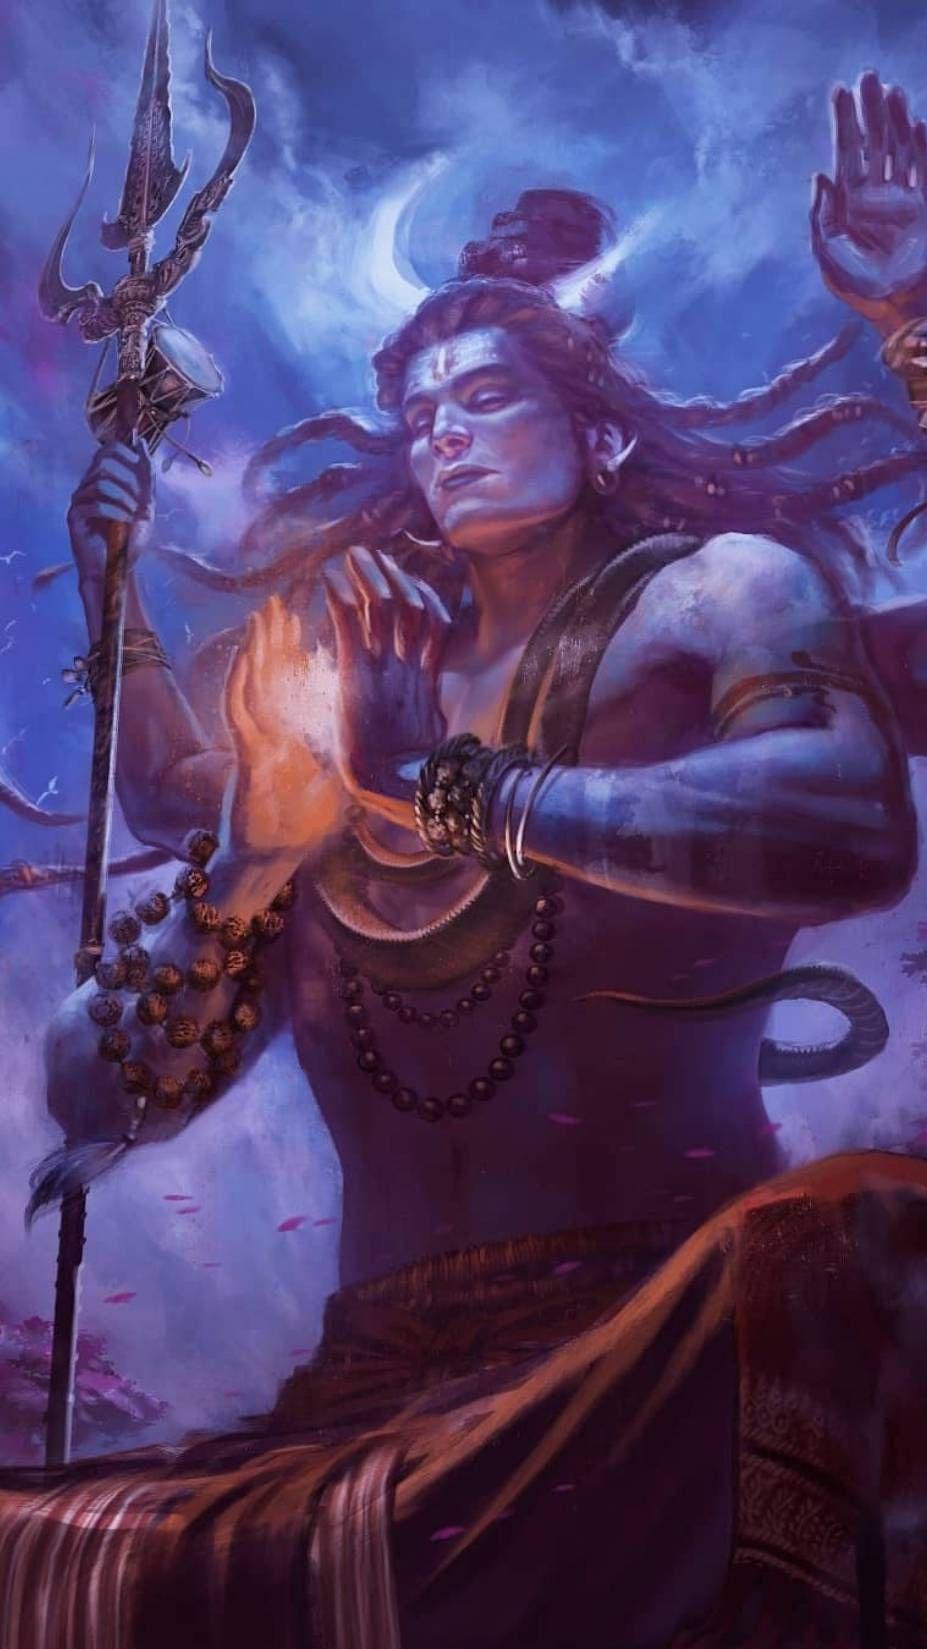 Shiva Iphone Wallpapers Top Free Shiva Iphone Backgrounds Wallpaperaccess